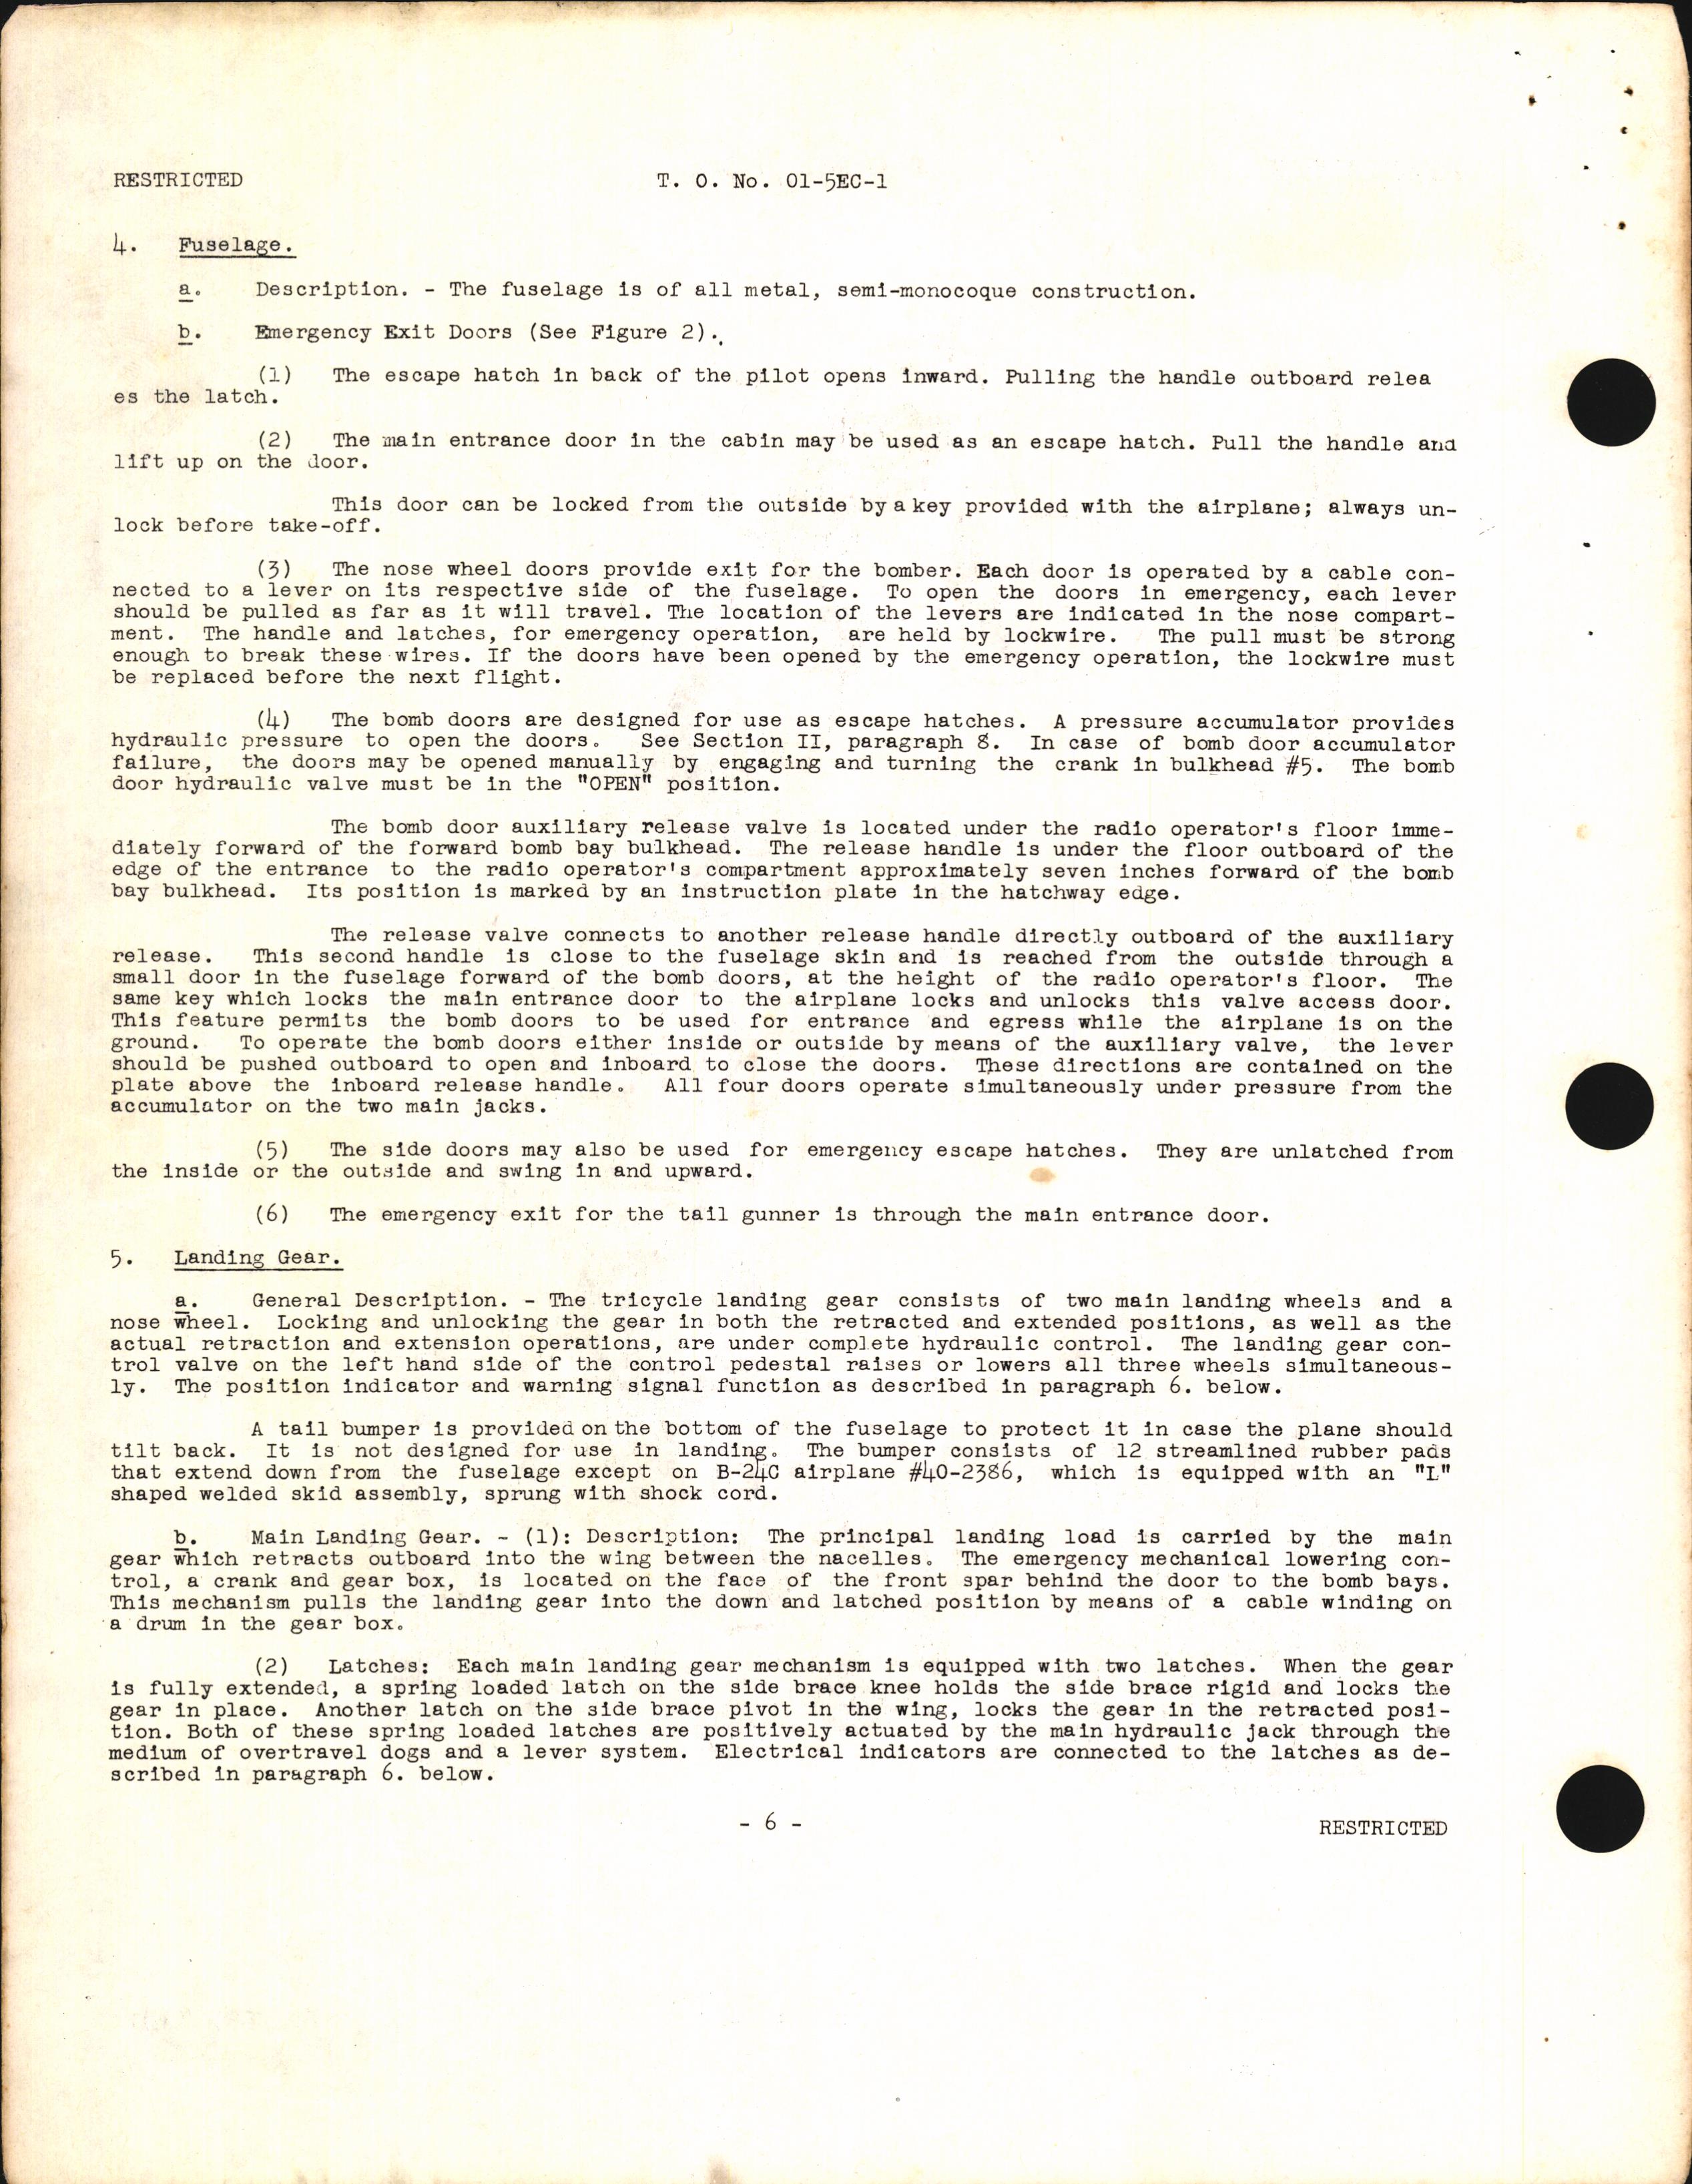 Sample page 8 from AirCorps Library document: Operation and Flight Instructions for B-24C and D